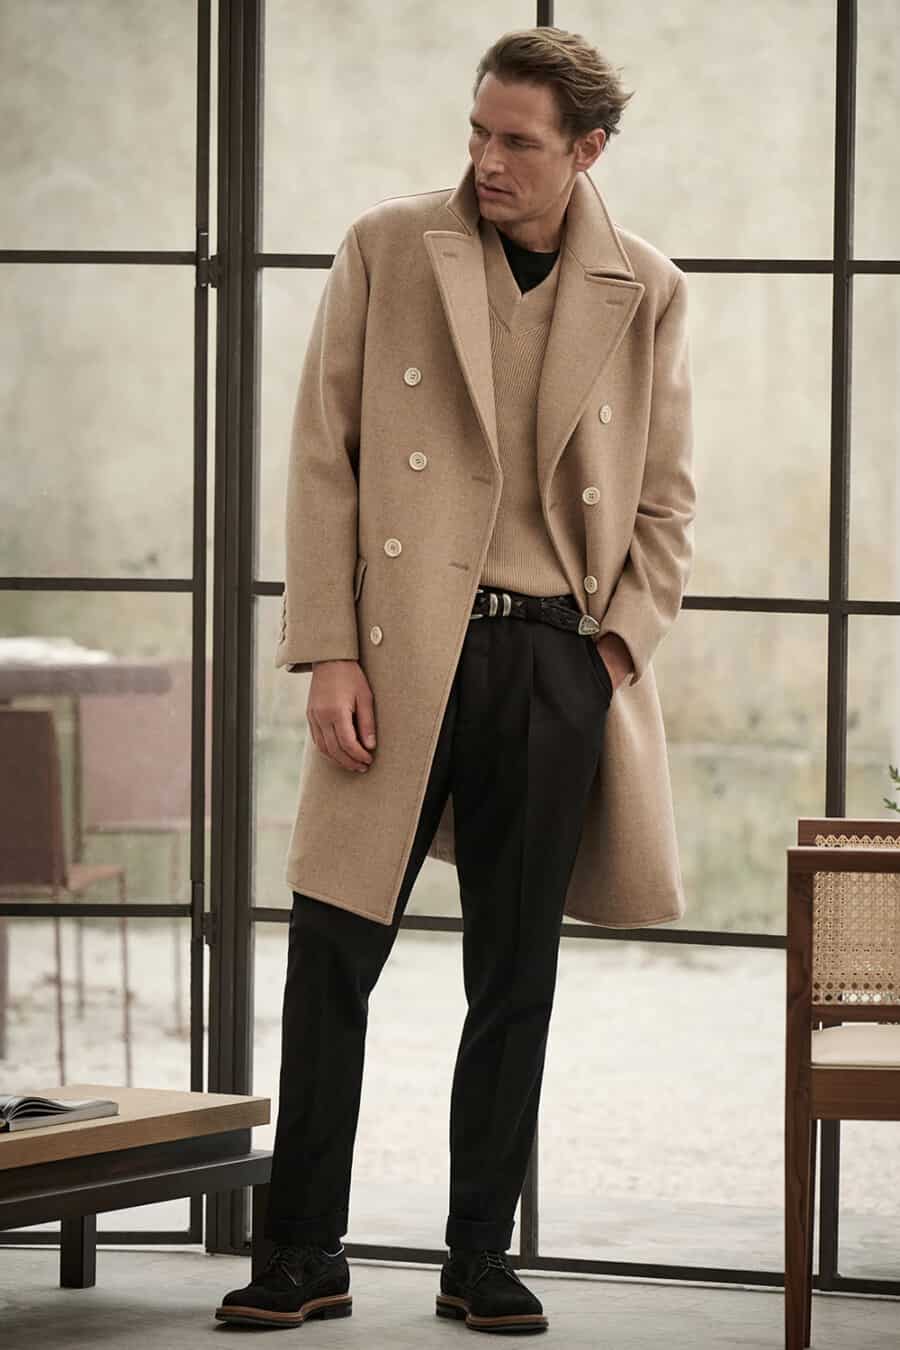 Men's black pleated trousers, camel v-neck sweater, camerl overcoat and suede brogues outfit